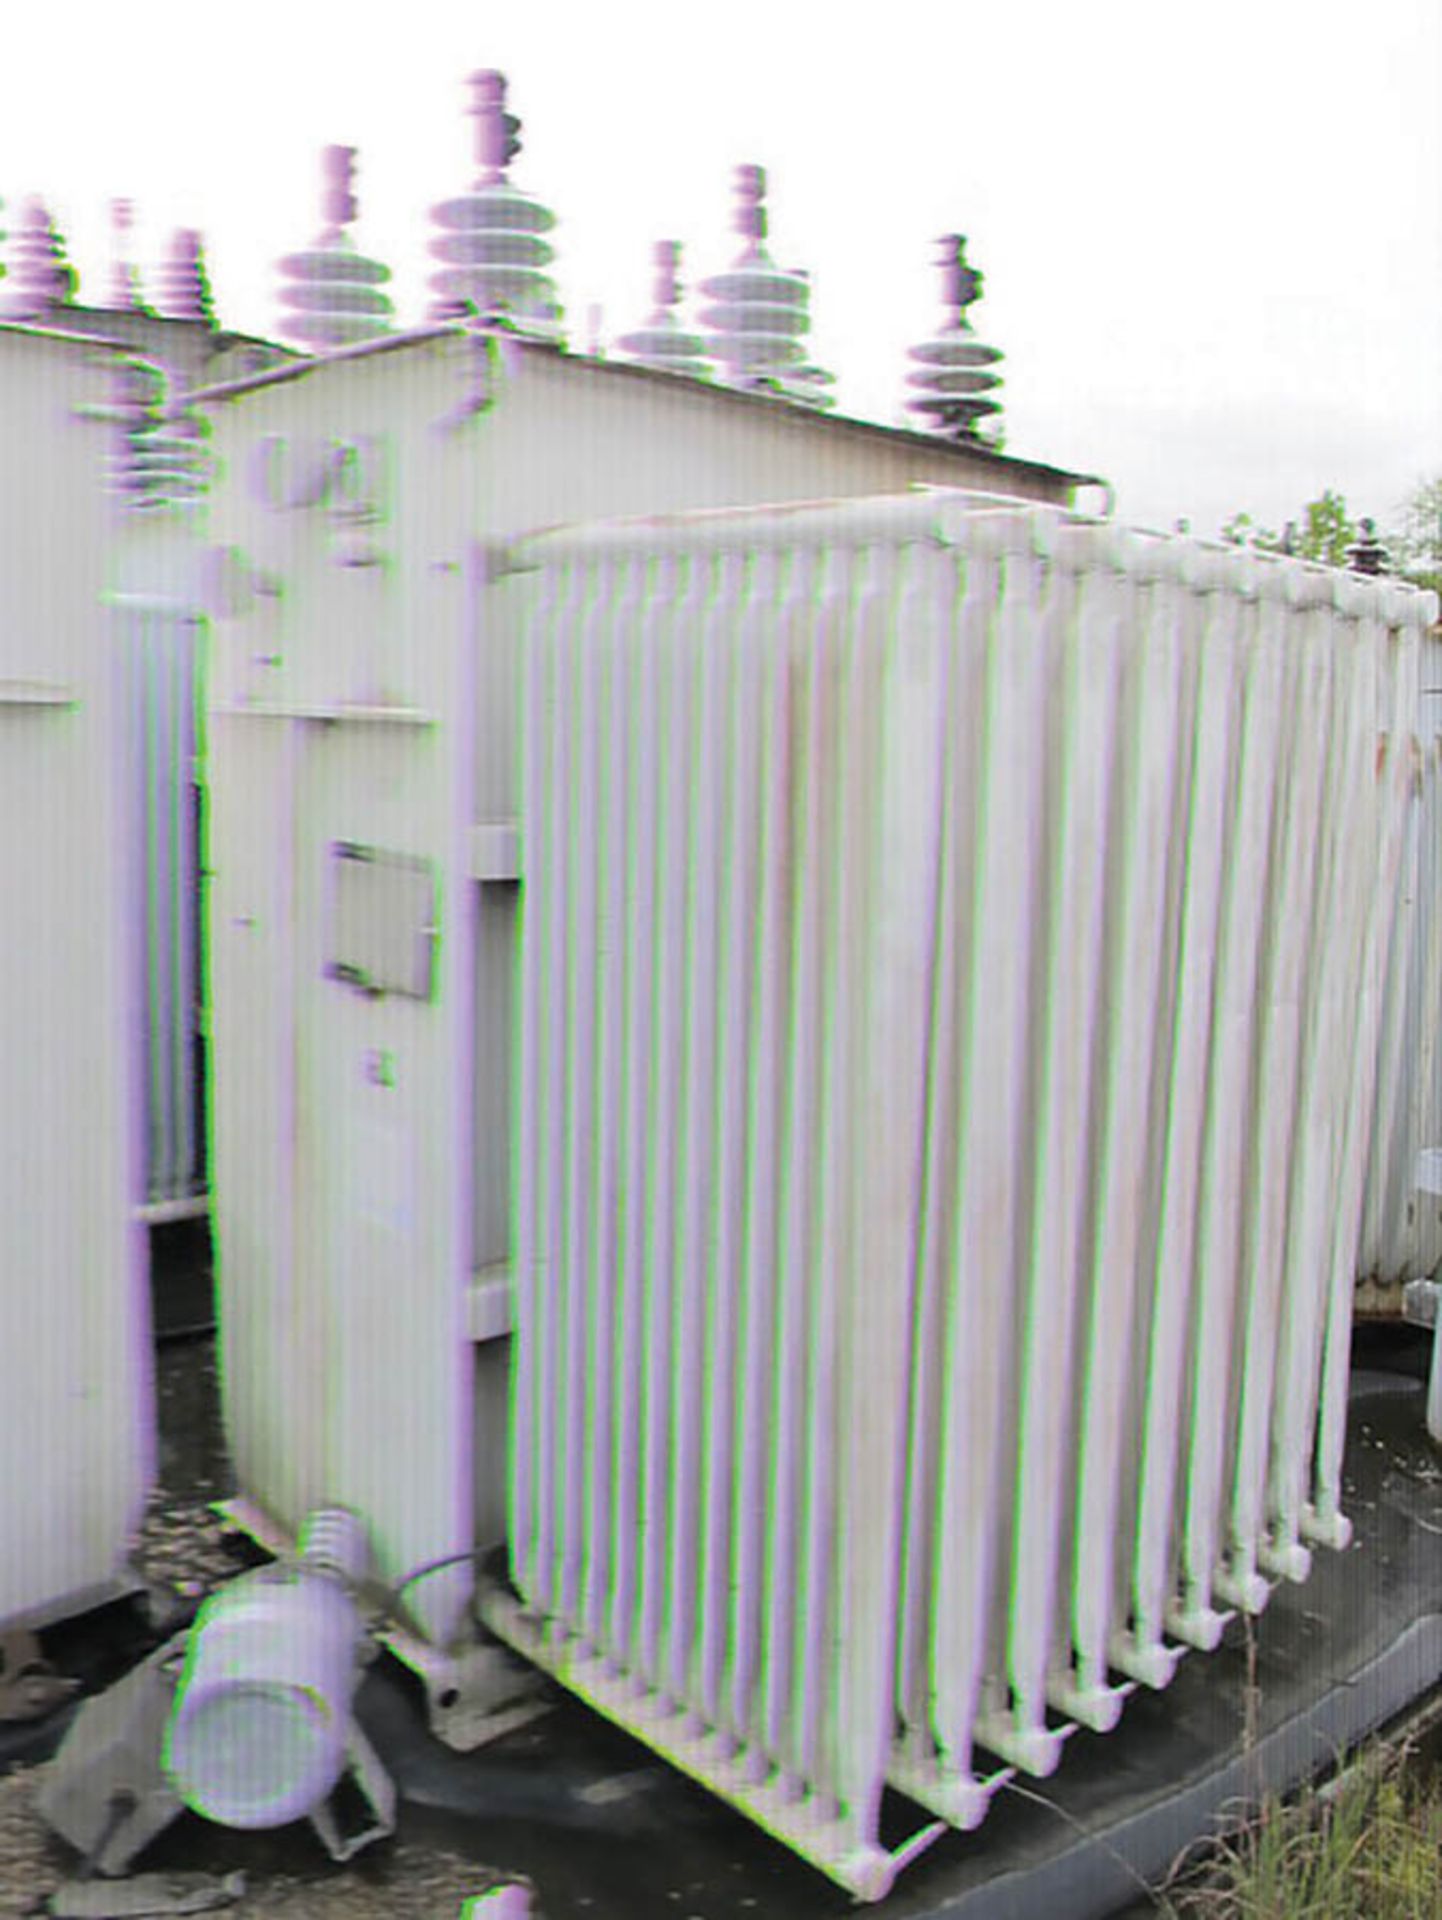 GENERAL ELECTRIC 1000 KVA THREE PHASE TRANSFORMER, S/N G-854759A, VOLTAGE RATING 12,470-4,160Y/2, - Image 2 of 3